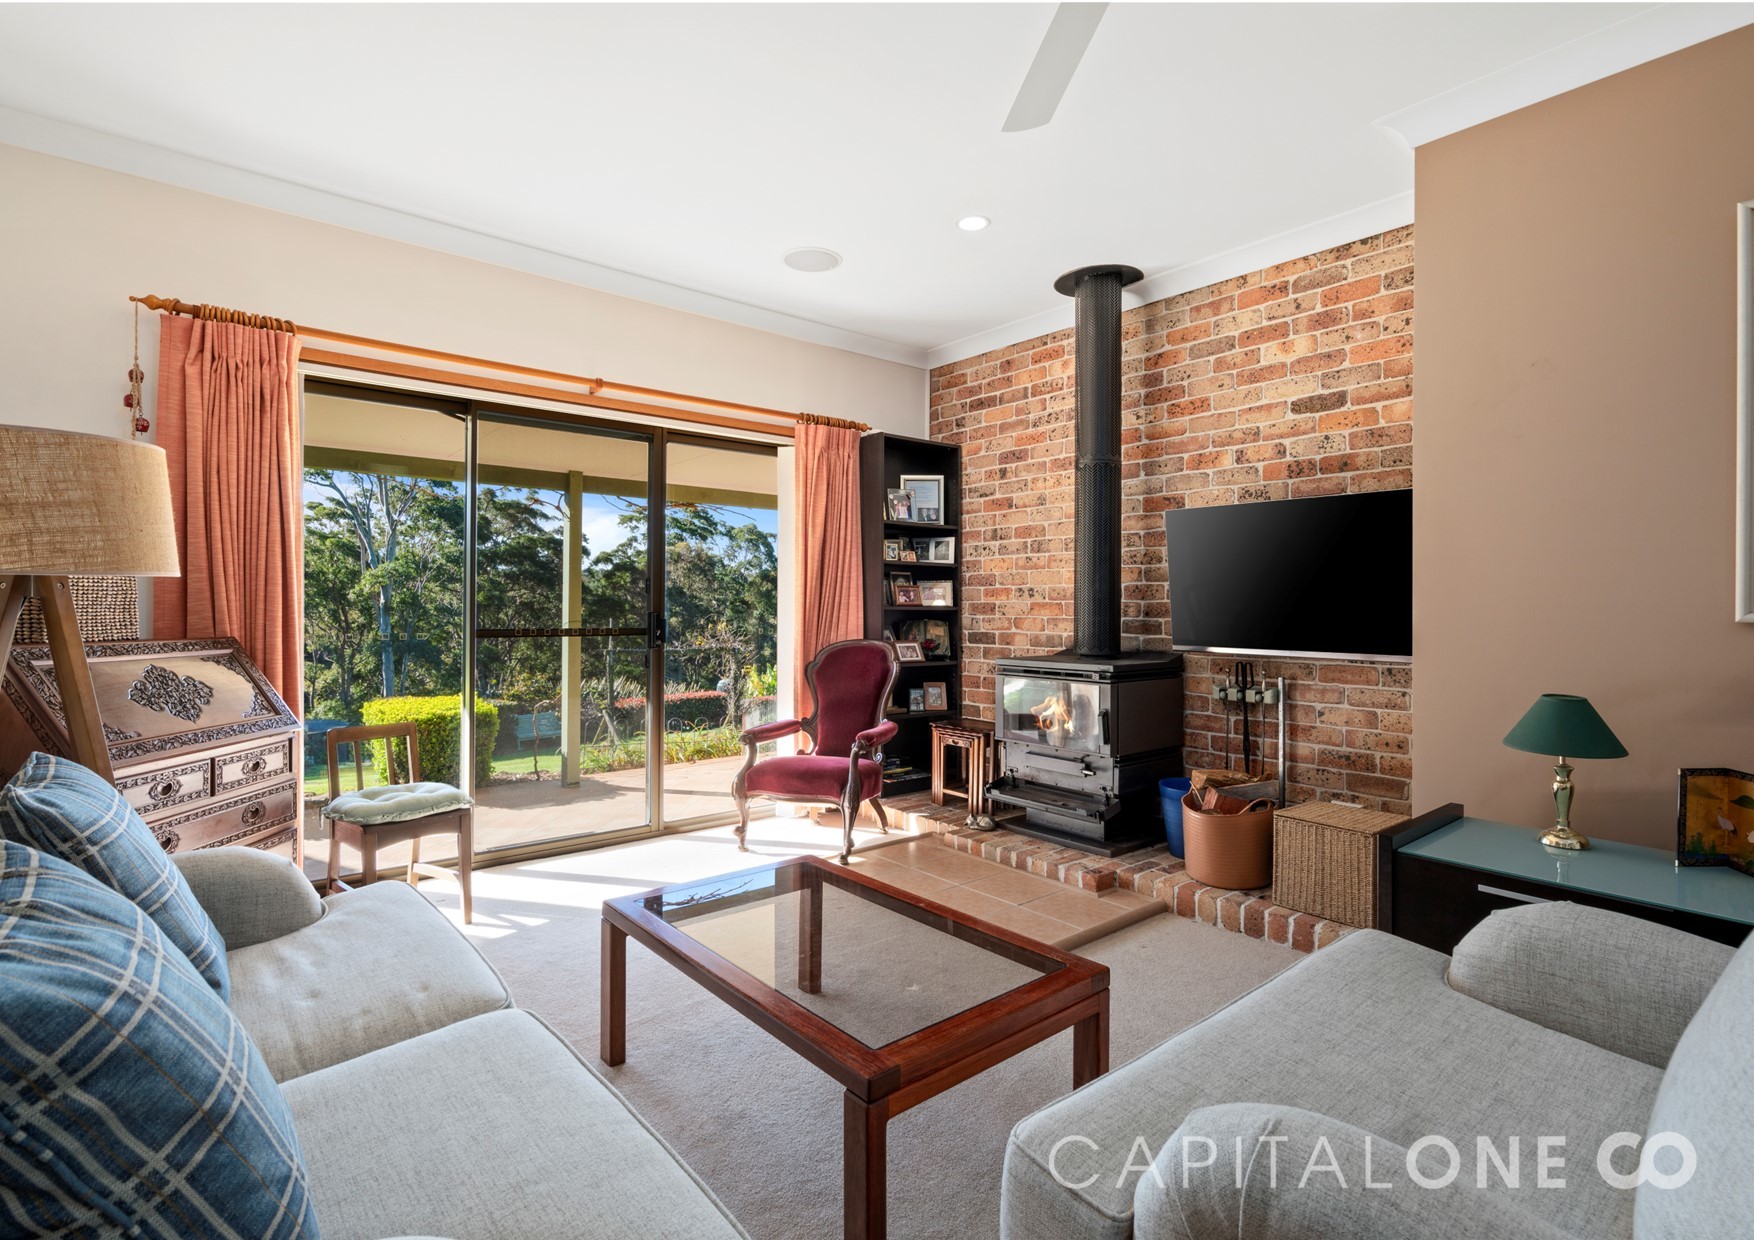 Real Estate in Ourimbah